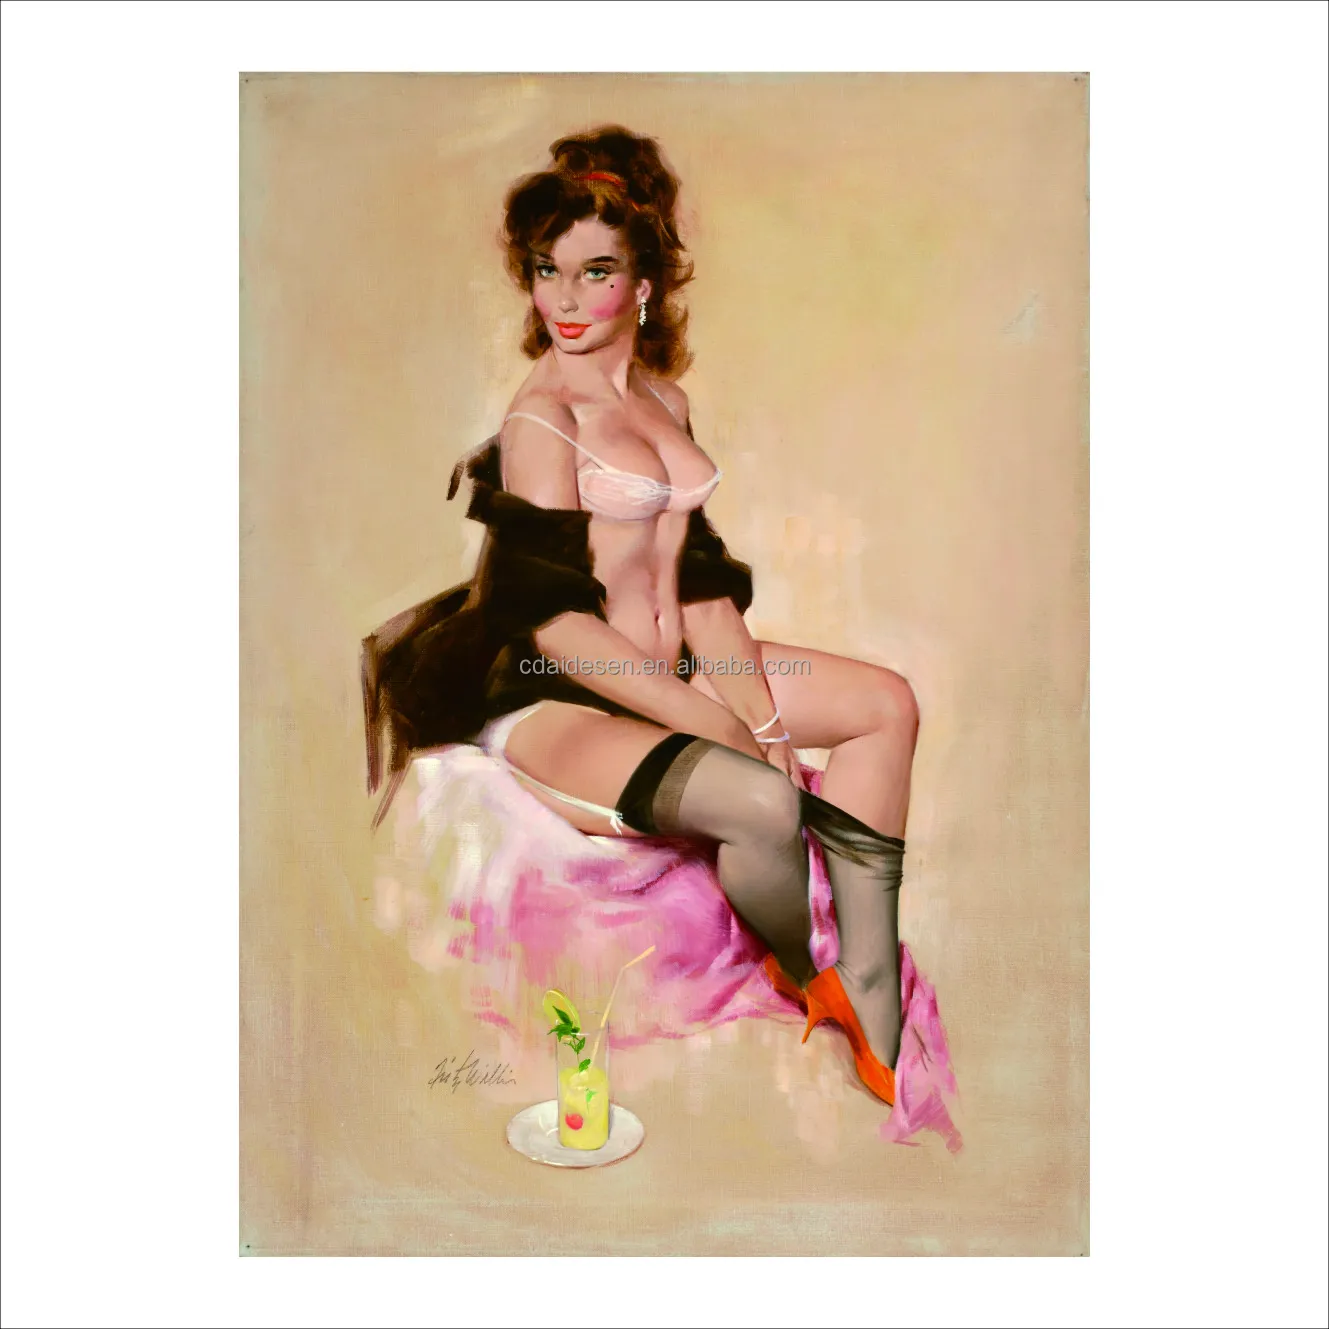 Only Girl To Girl Xxxx - Mindblowing Women Nude Figures Wall Art Oil Painting On Canvas Erotic  Modern Portrait Home Decoration Wall Art - Buy Xxxx Art And Craft For Waste  Materials Gifts,Sexy Girl Figurines Statue Poster Craft,Porn